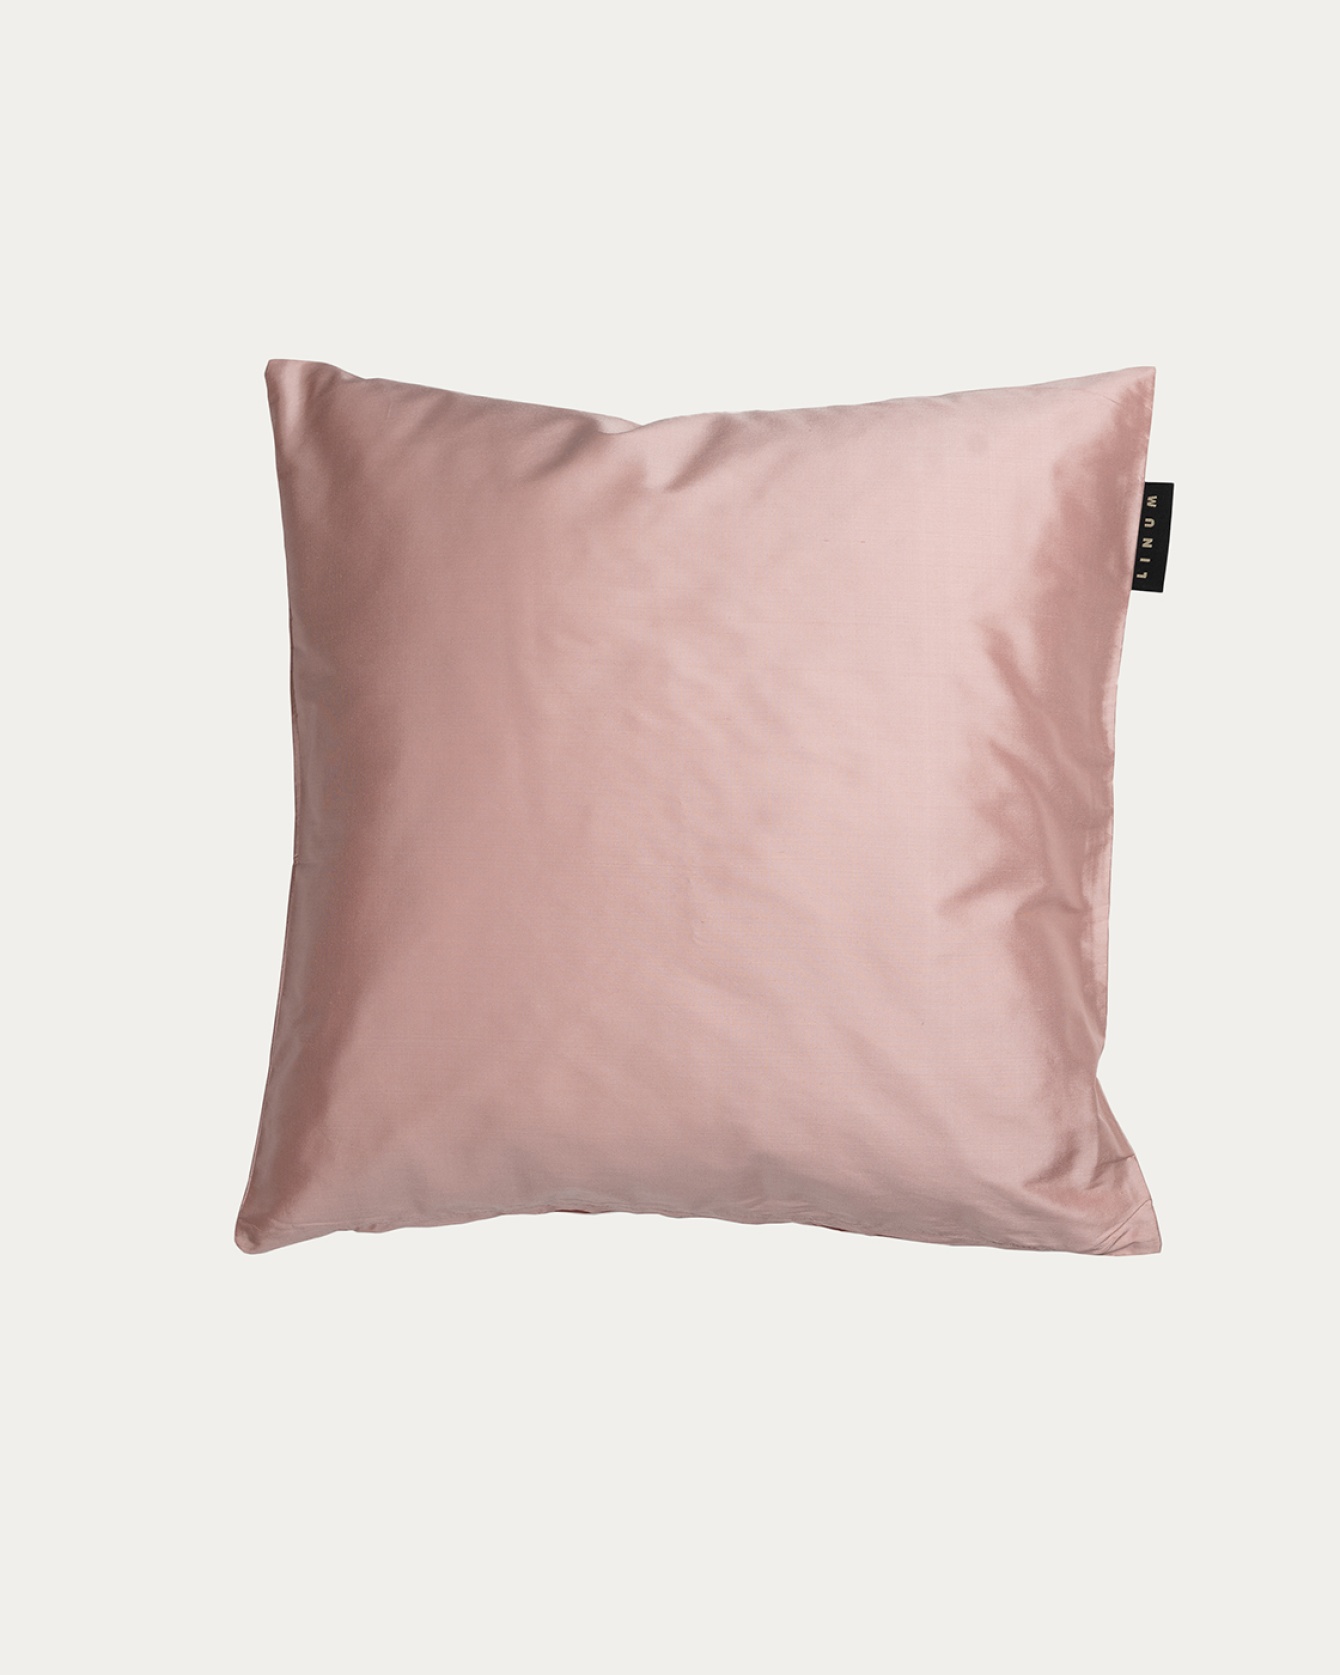 Product image dusty pink SILK cushion cover made of 100% dupion silk that gives a nice lustre from LINUM DESIGN. Size 40x40 cm.